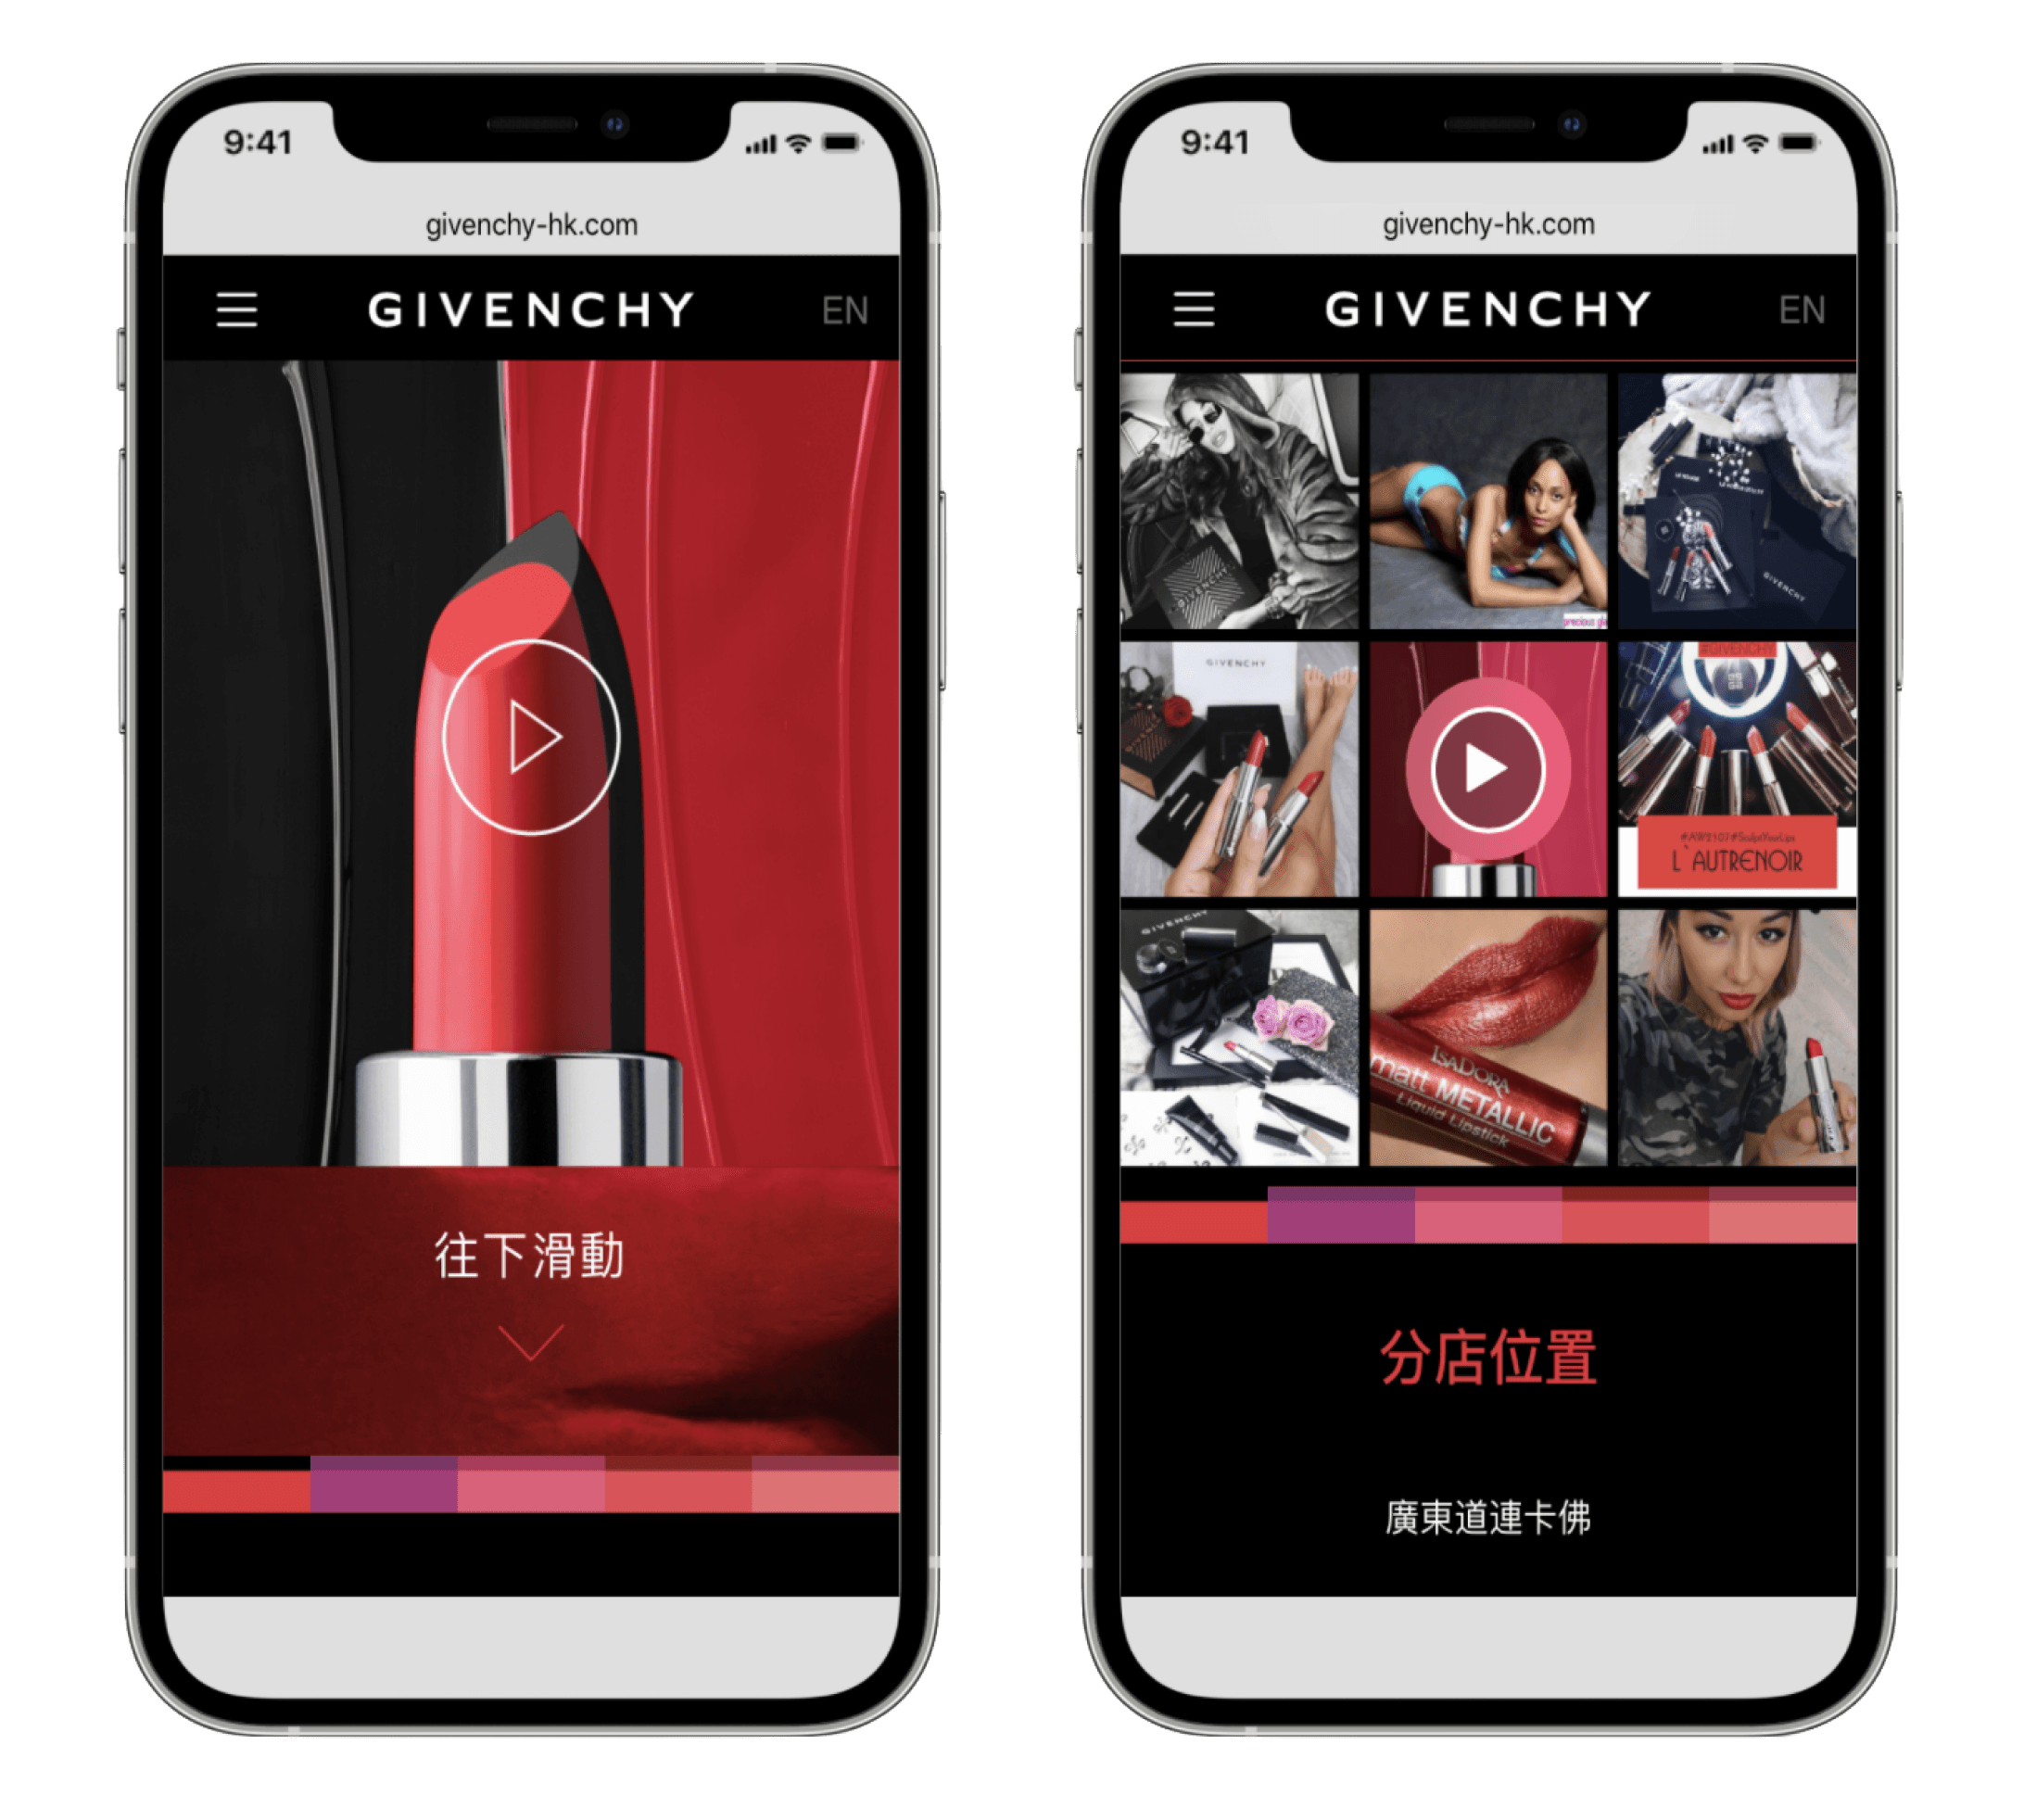 Givenchy promotional page on mobile